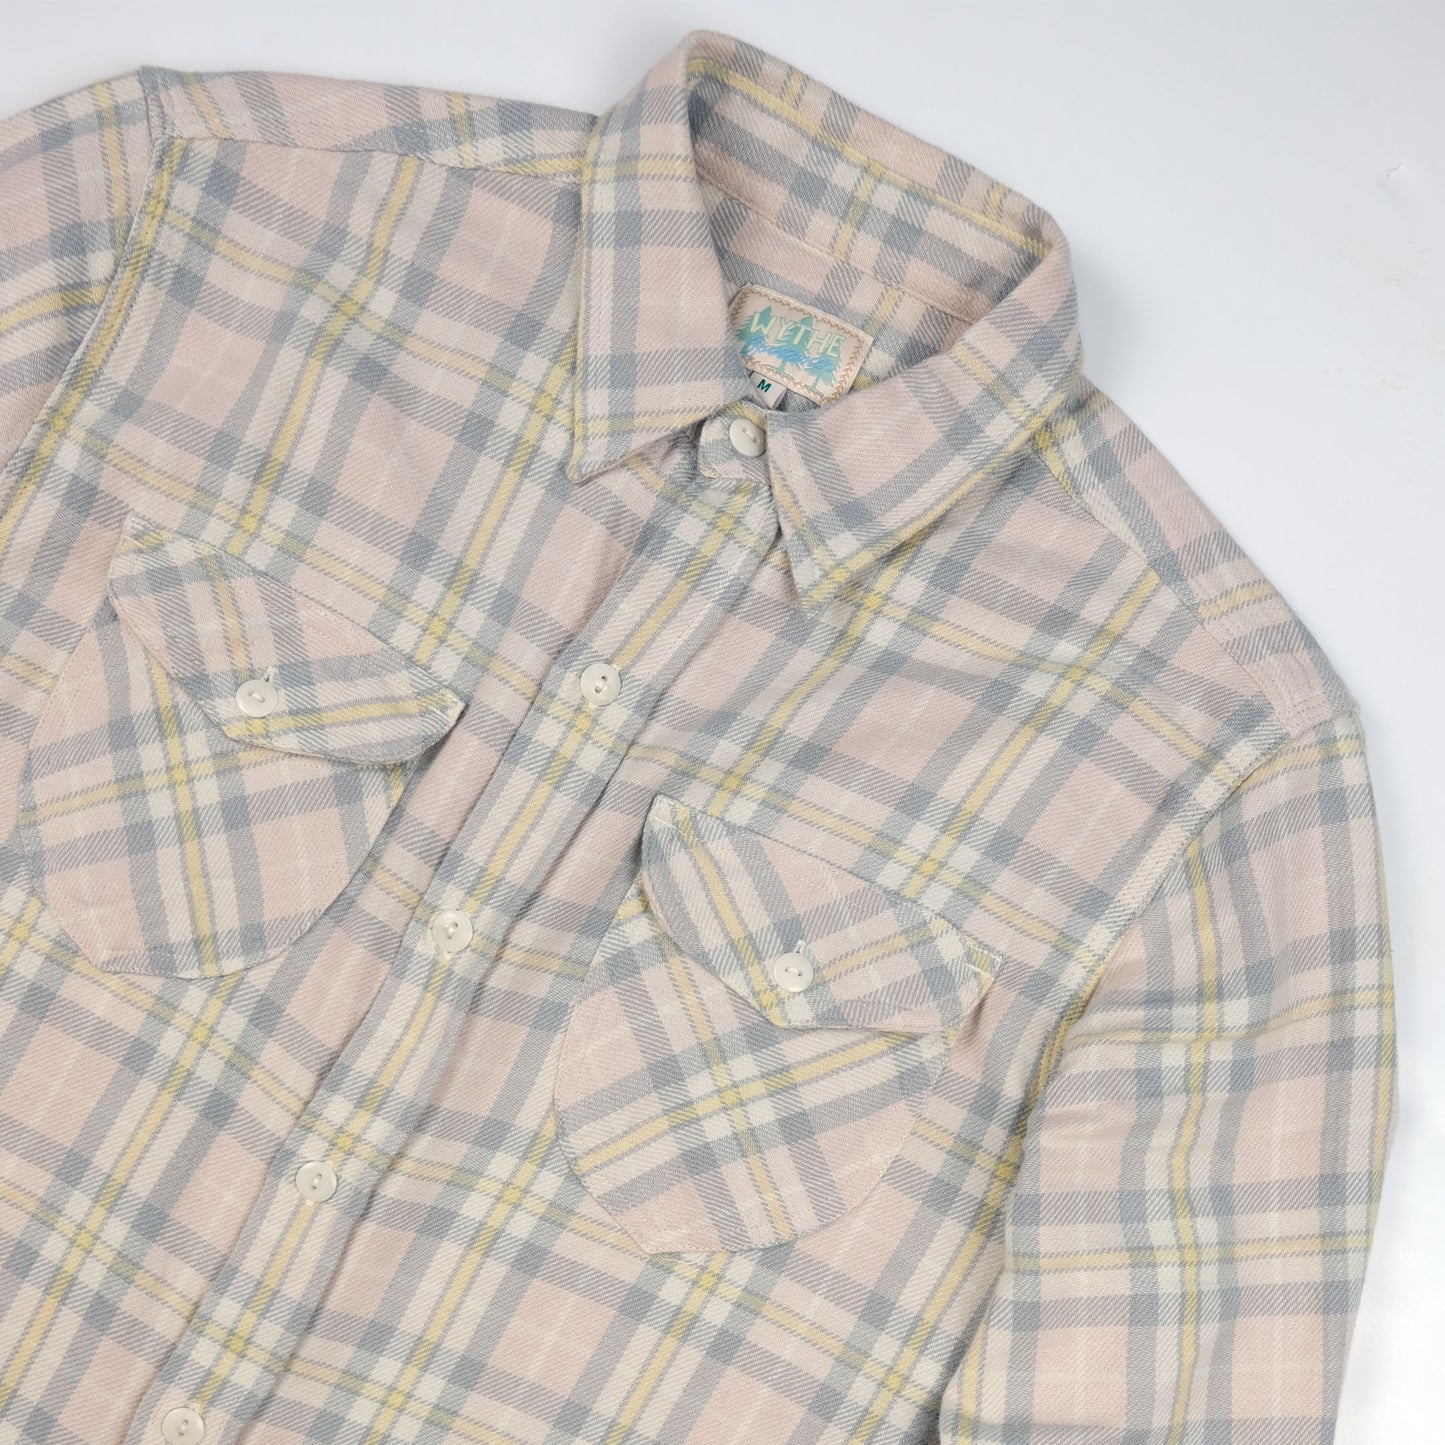 Washed Flannel Work Shirt in Abiquiu Sunset